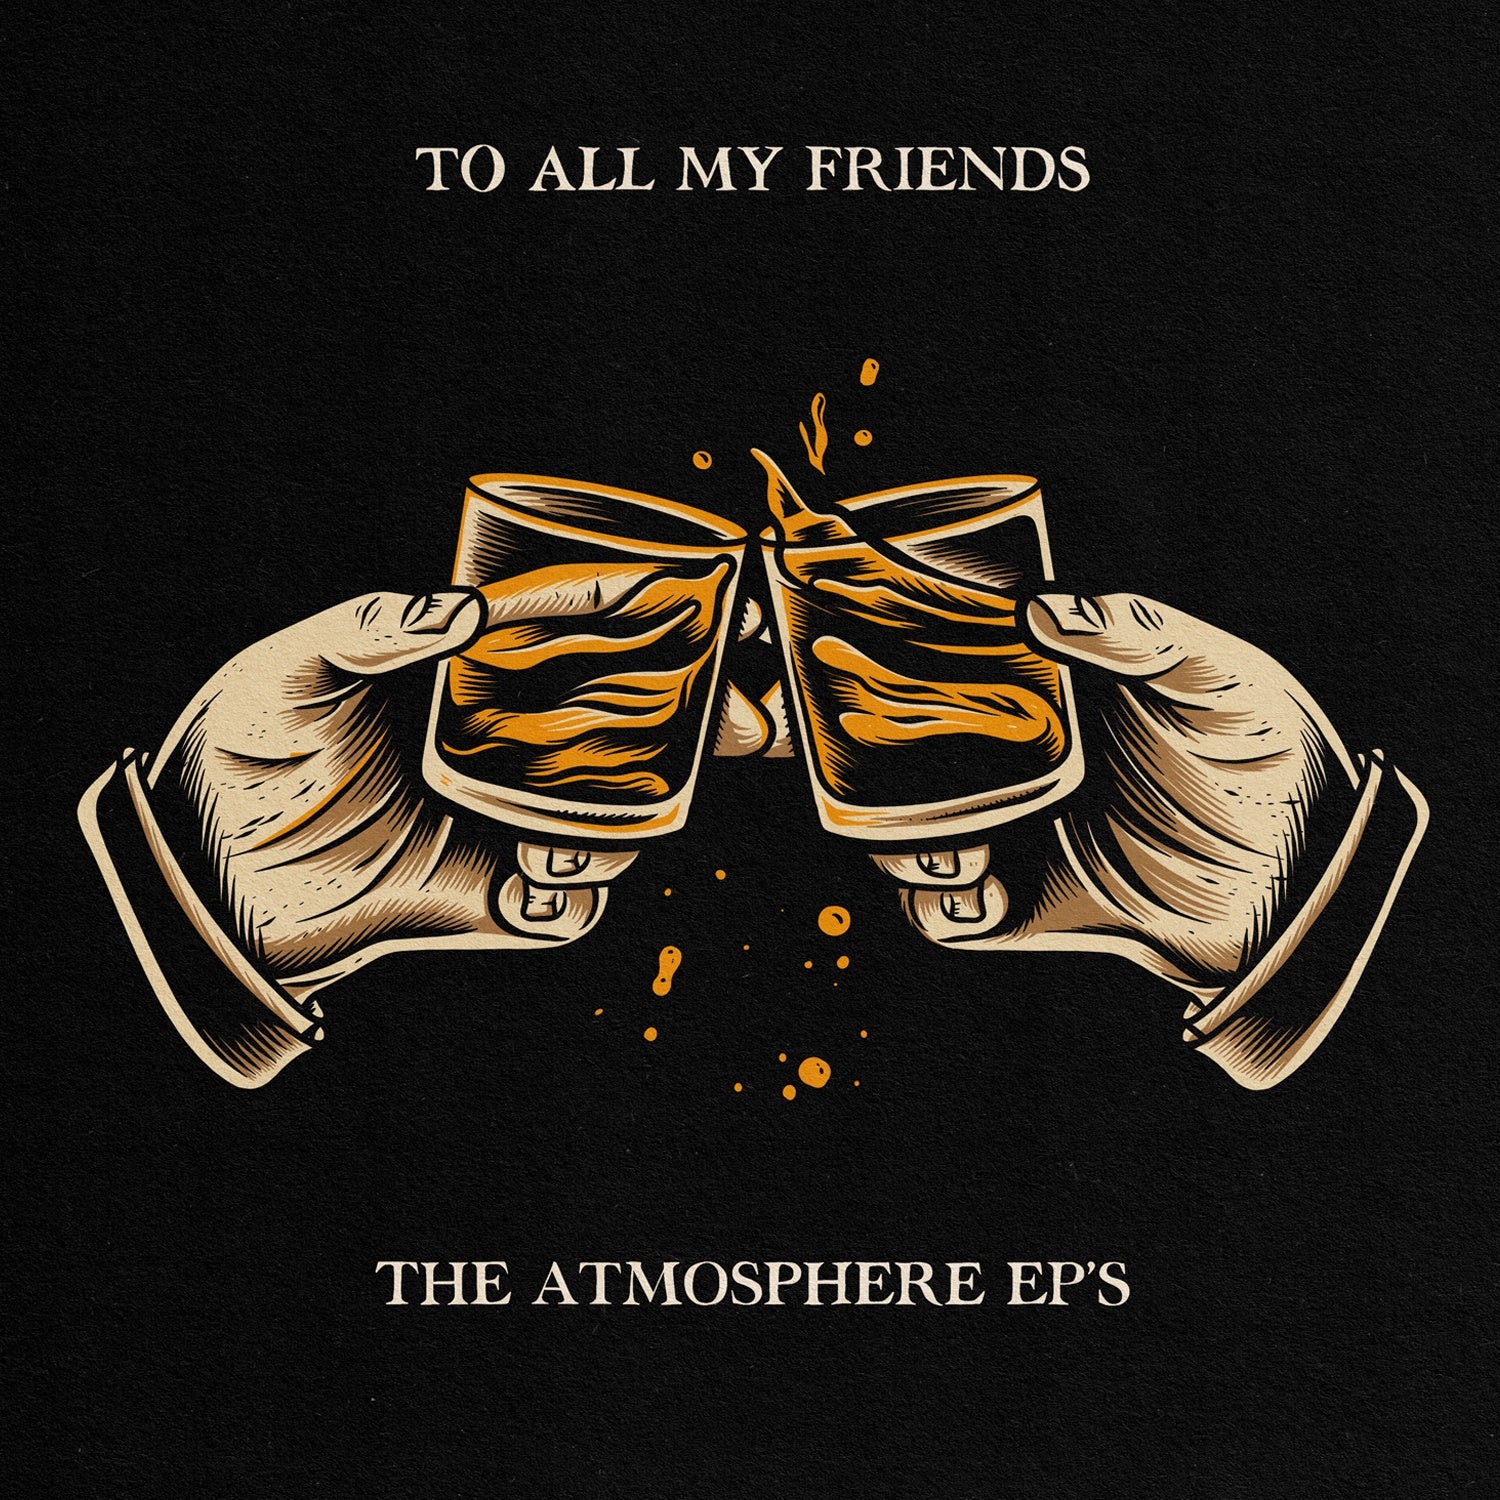 Atmosphere - To All My Friends, Blood Makes The Blade Holy: The Atmosphere EP's (2010) - New 2 LP Record 2020 Rhymesayers Vinyl & Download - Rap / Hip Hop